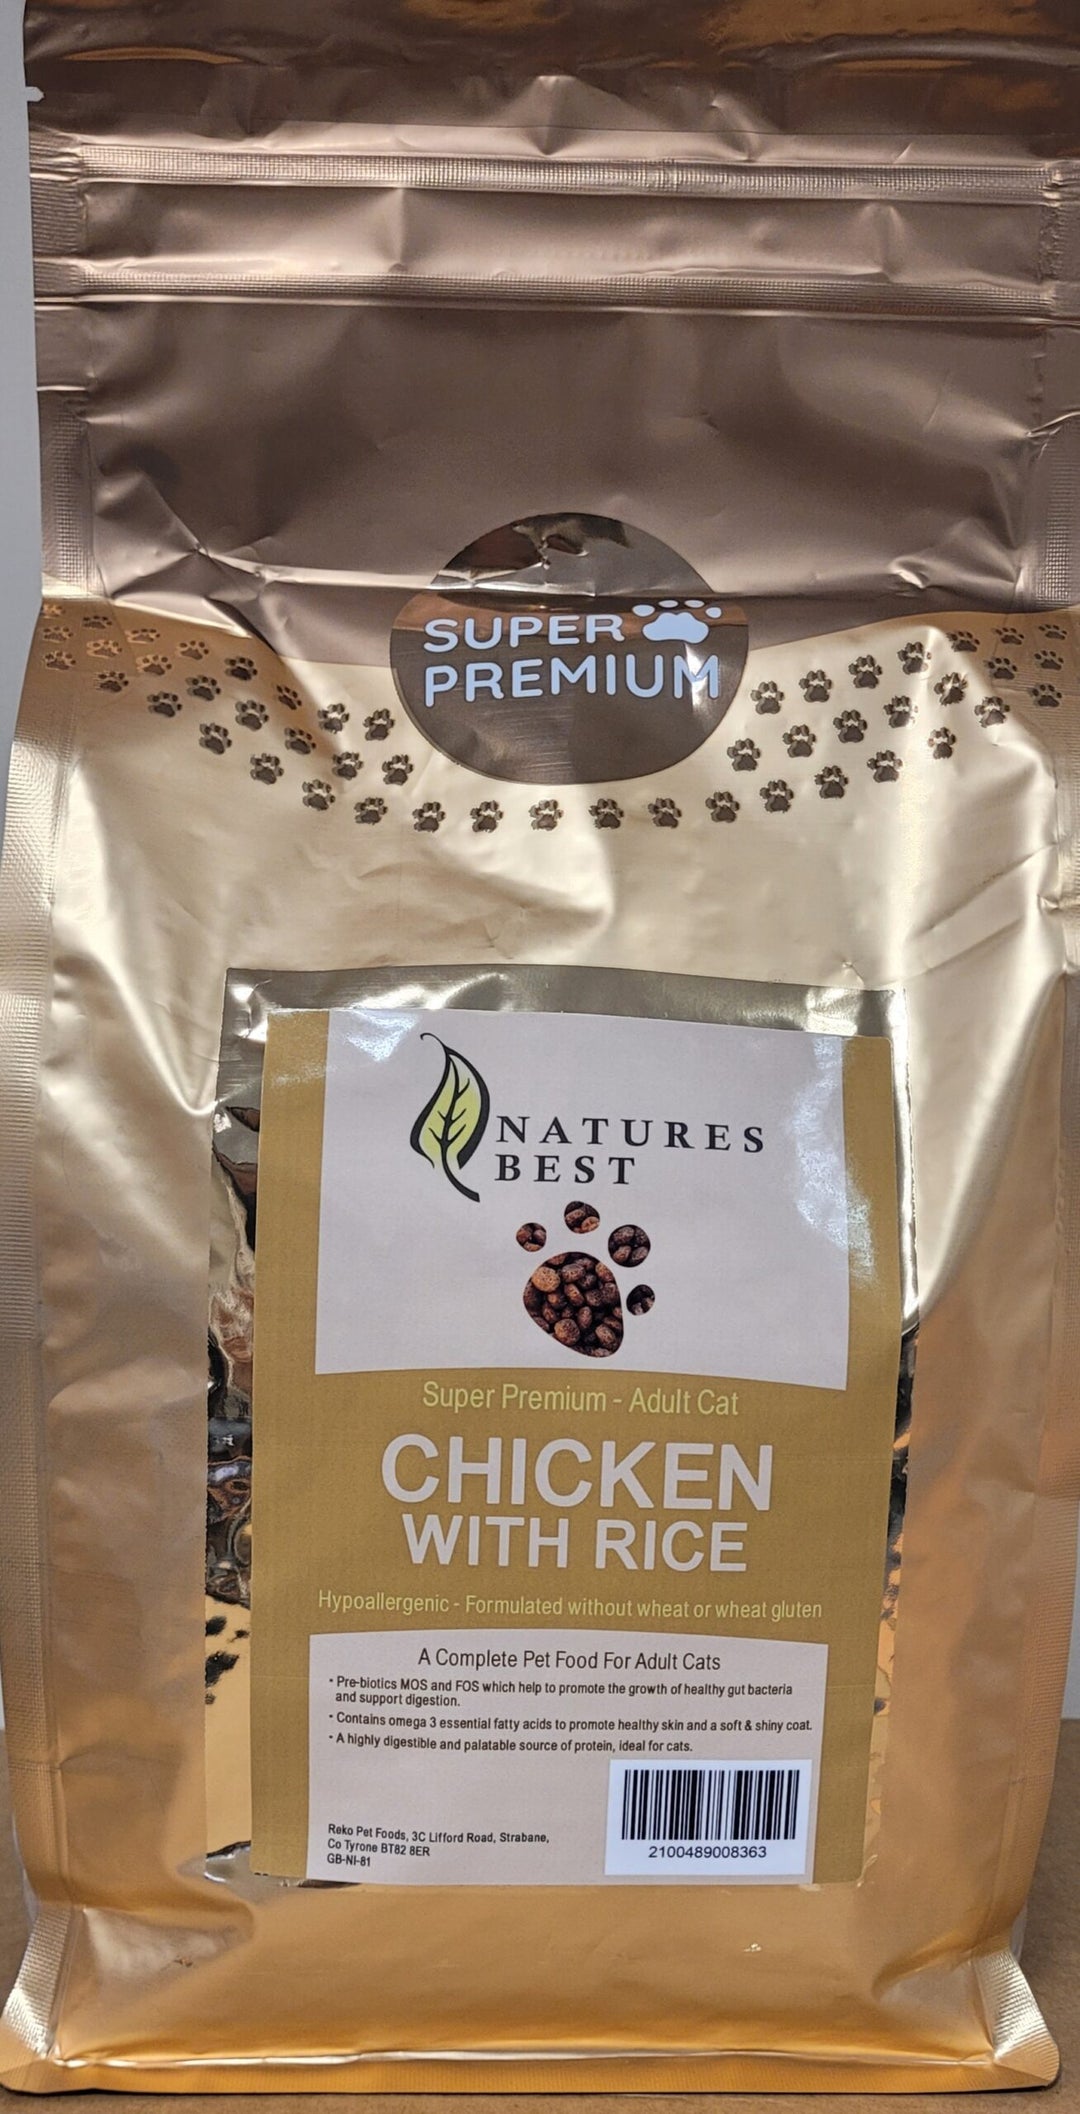 Chicken Cat Food by Natures Best - Wheat Free Cat Food